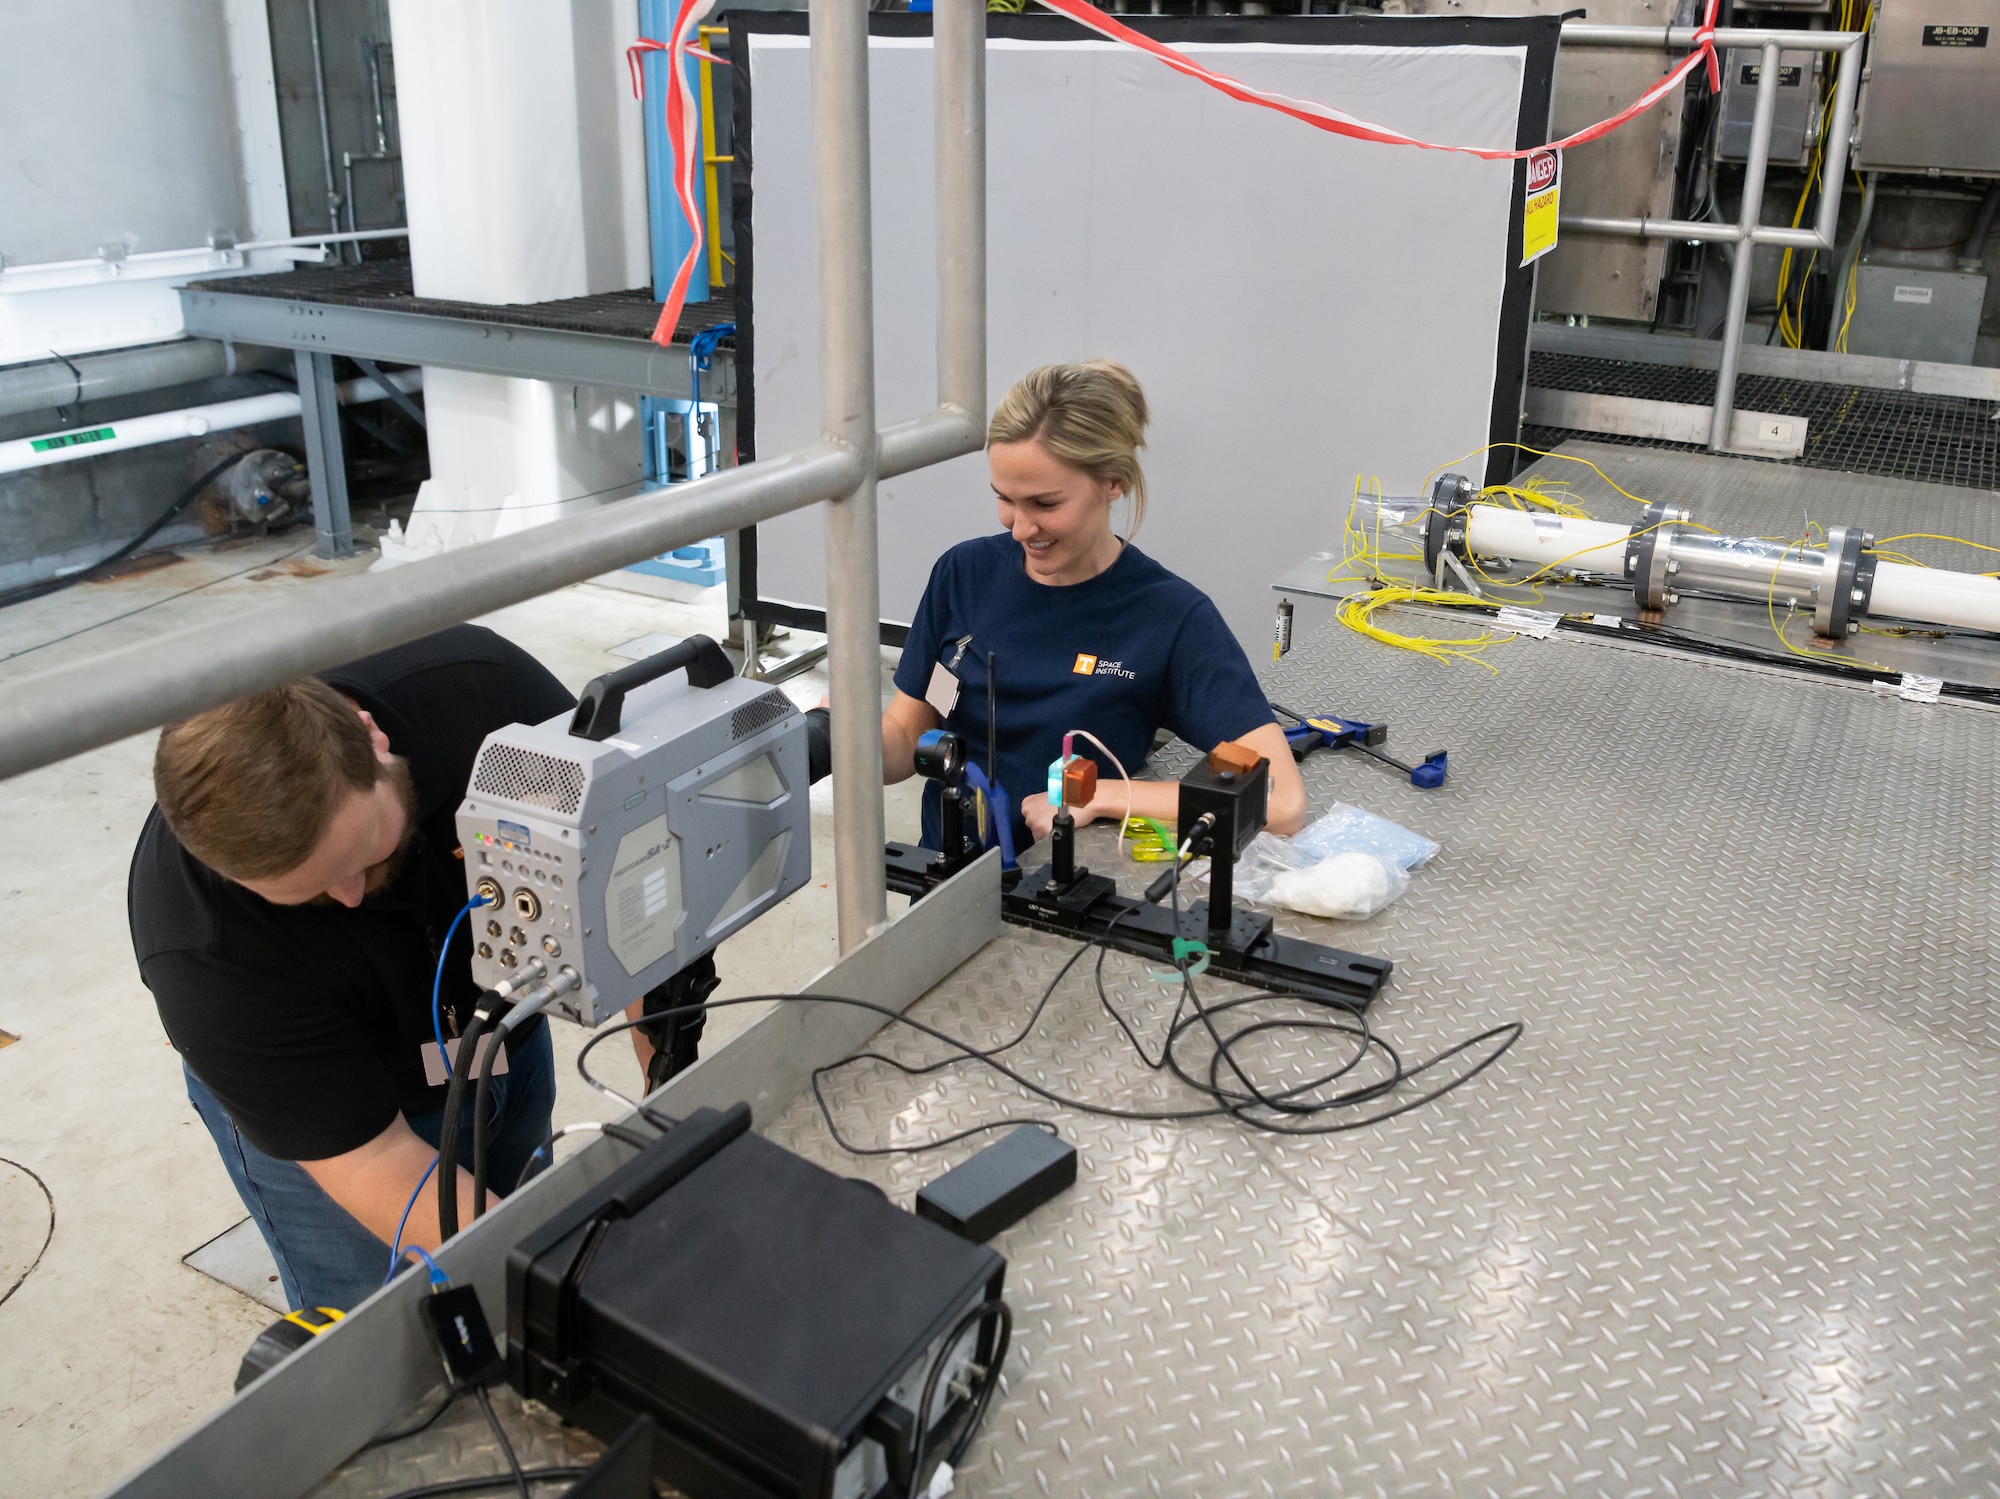 Dr. Phil Kreth and Haley Goldston, with the University of Tennessee Space Institute, set up equipment in SL-2, a sea level turbine engine test cell at Arnold Air Force Base, Tenn.